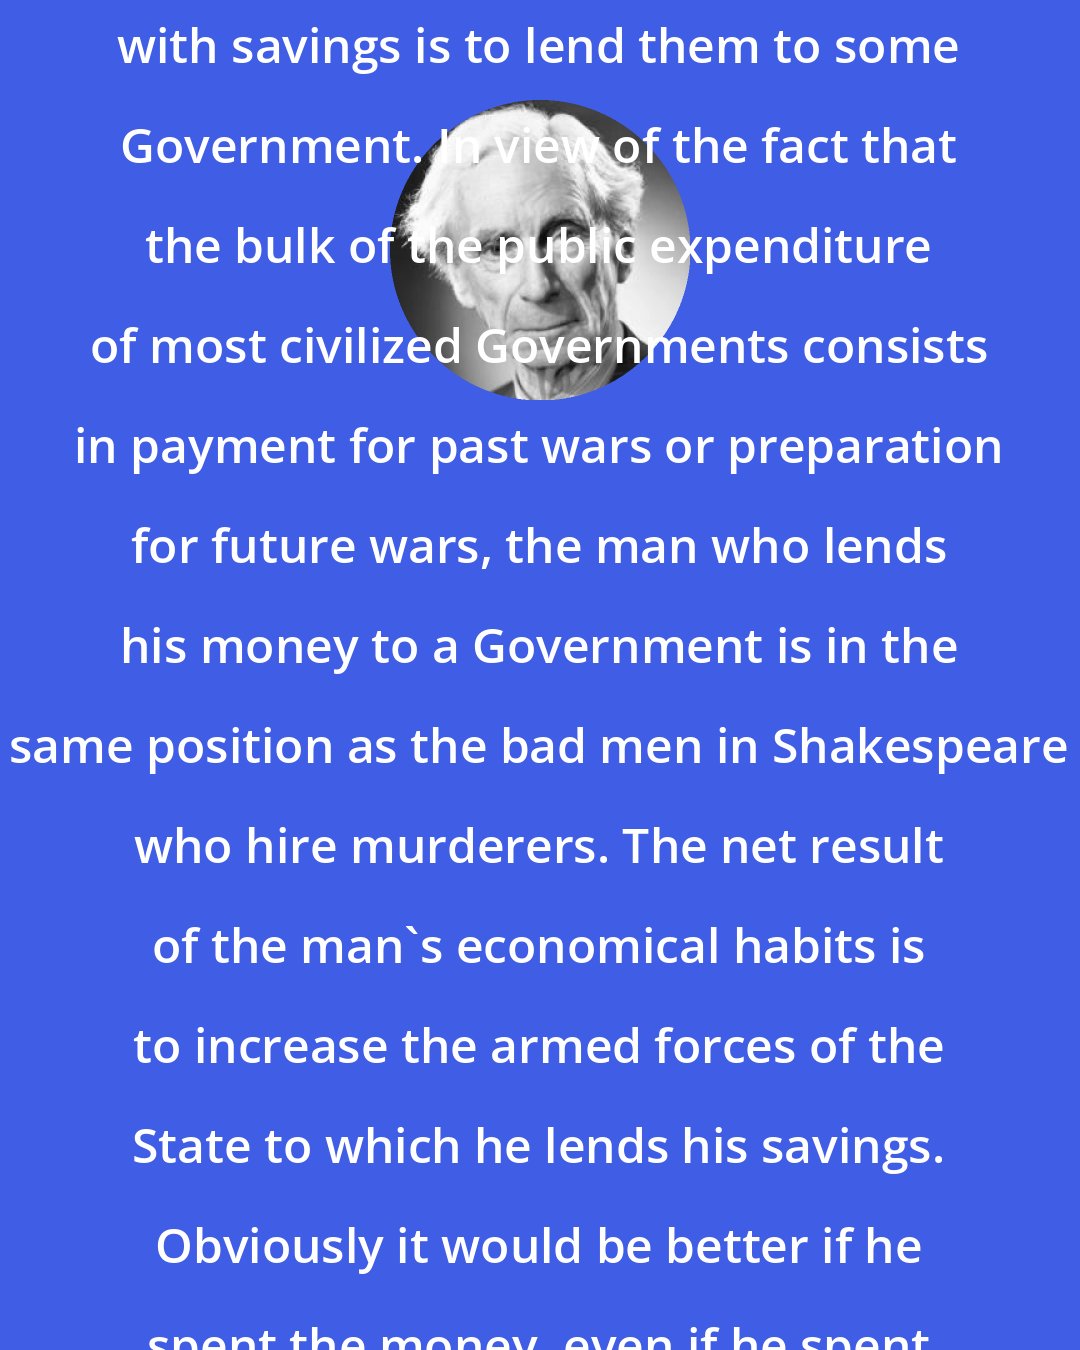 Bertrand Russell: One of the commonest things to do with savings is to lend them to some Government. In view of the fact that the bulk of the public expenditure of most civilized Governments consists in payment for past wars or preparation for future wars, the man who lends his money to a Government is in the same position as the bad men in Shakespeare who hire murderers. The net result of the man's economical habits is to increase the armed forces of the State to which he lends his savings. Obviously it would be better if he spent the money, even if he spent it in drink or gambling.